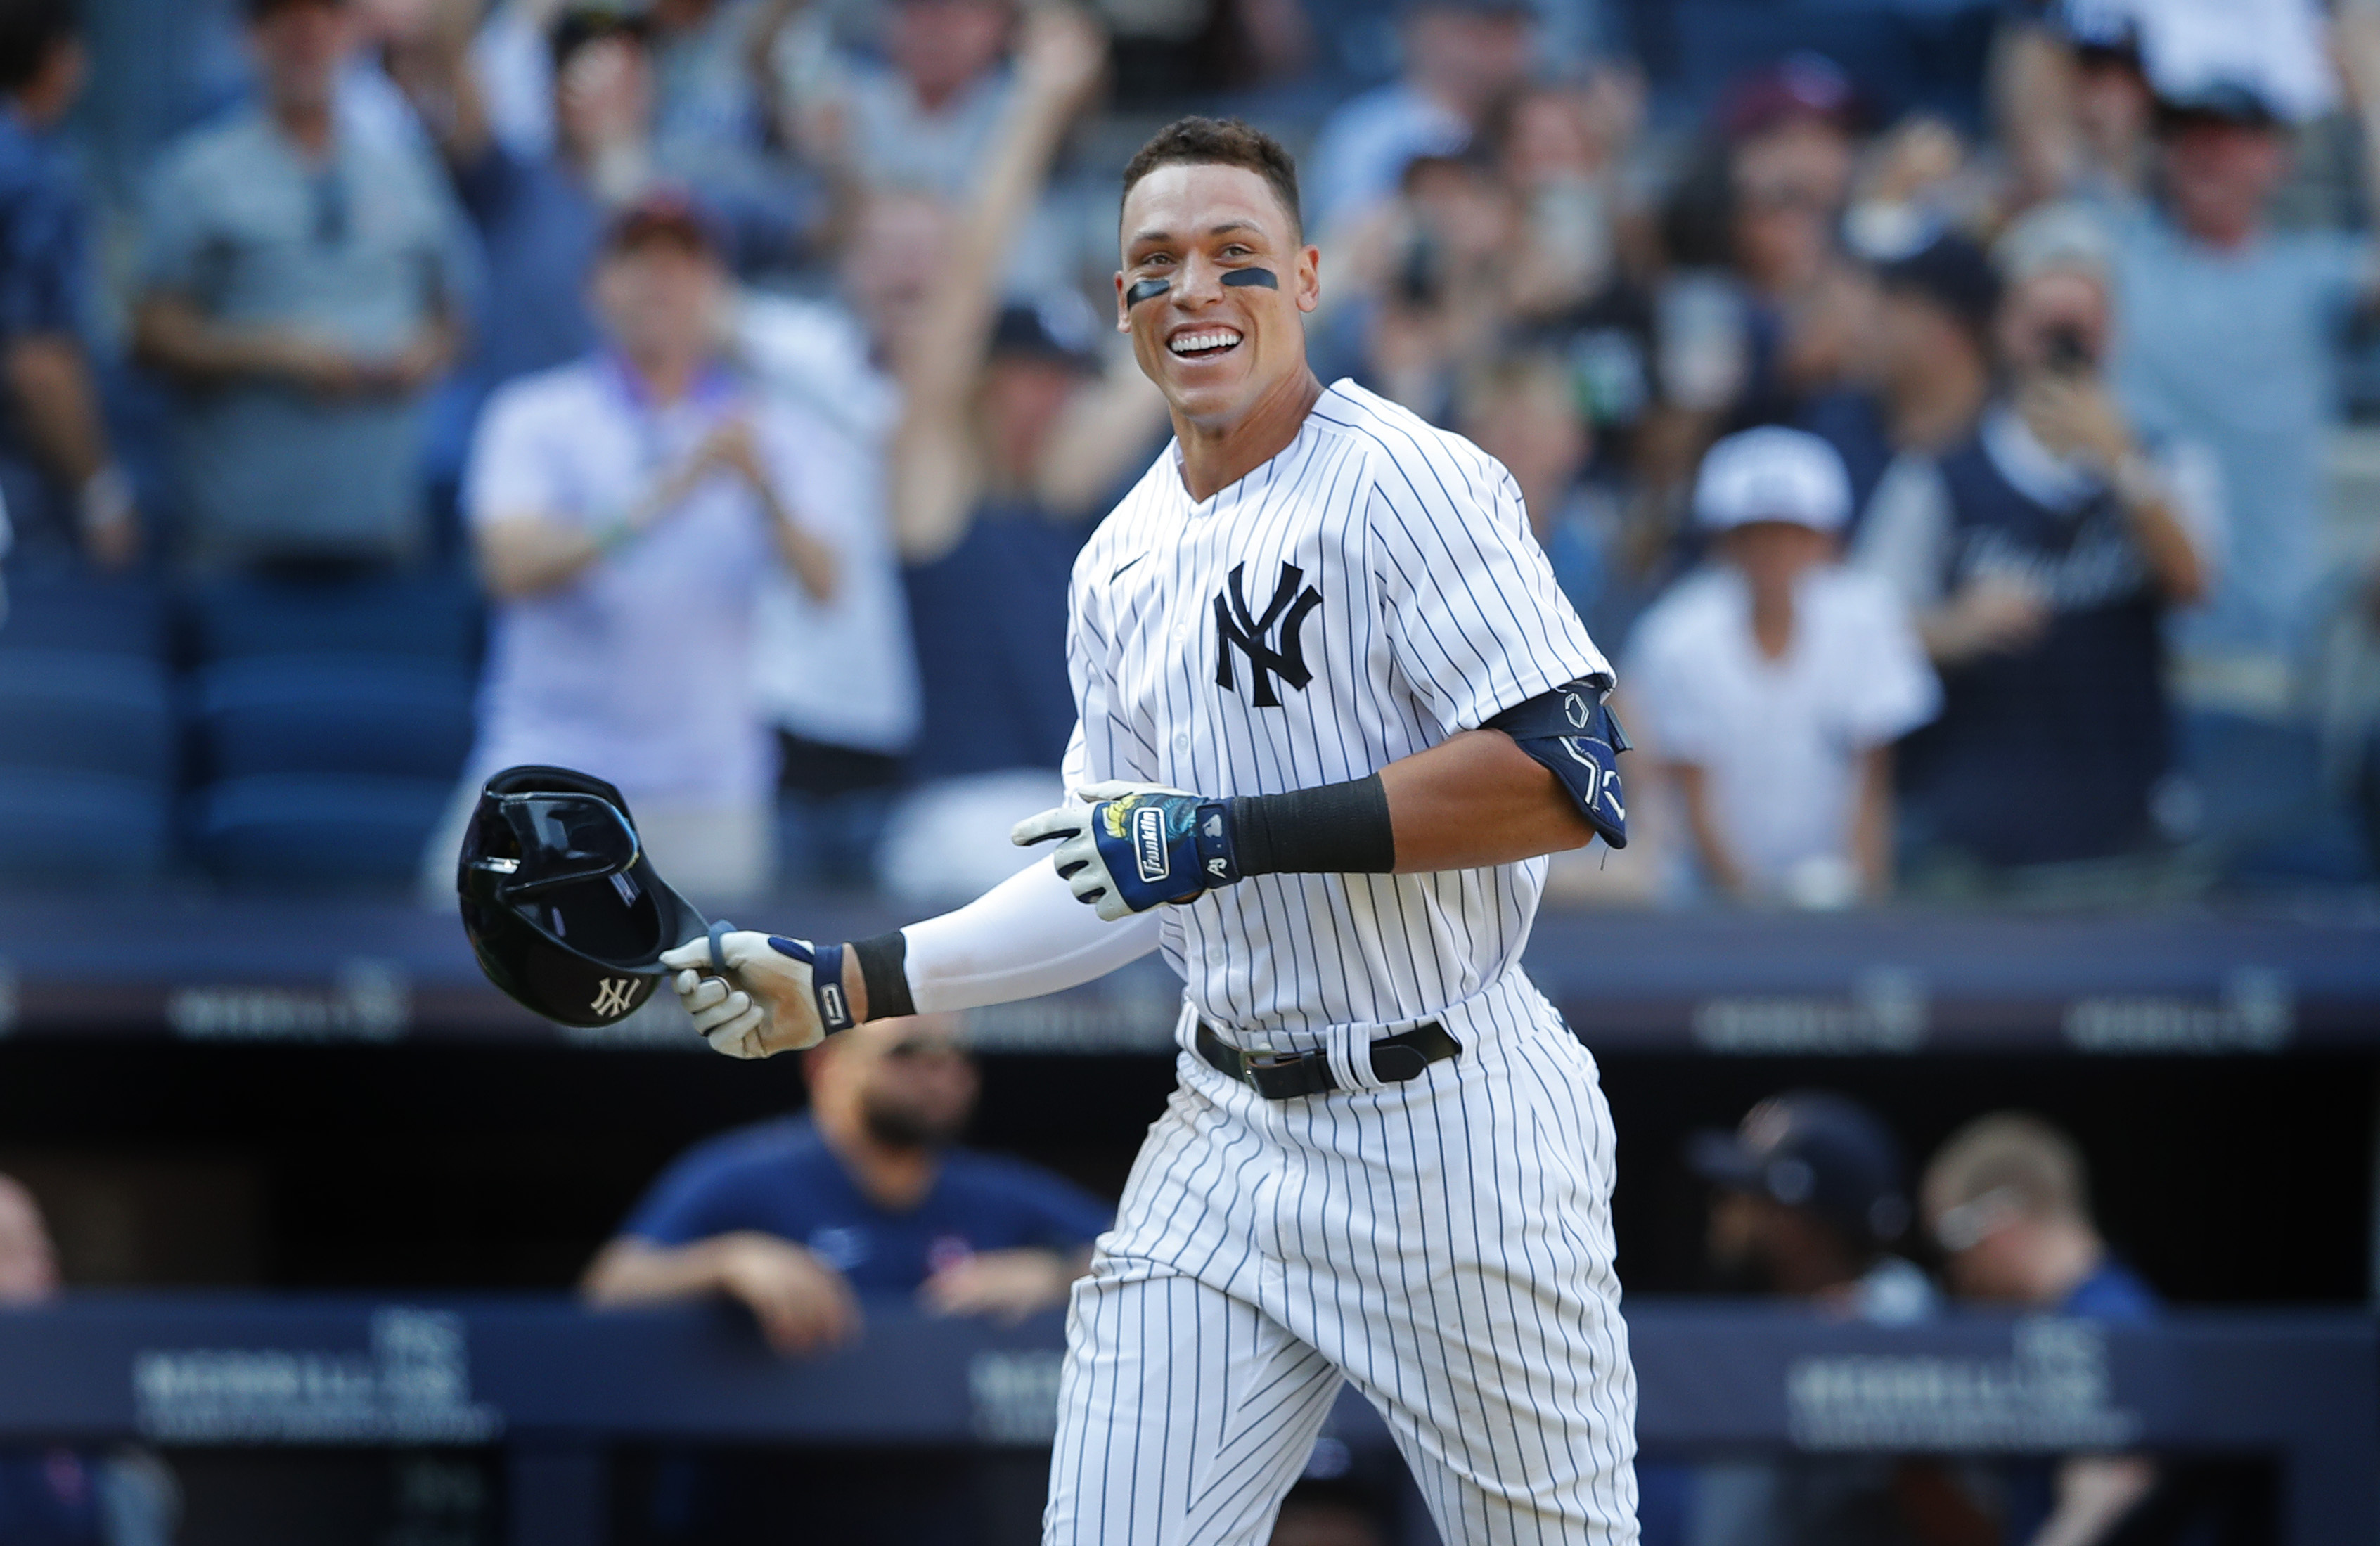 Inside Aaron Judge's free agency process and return to Yankees